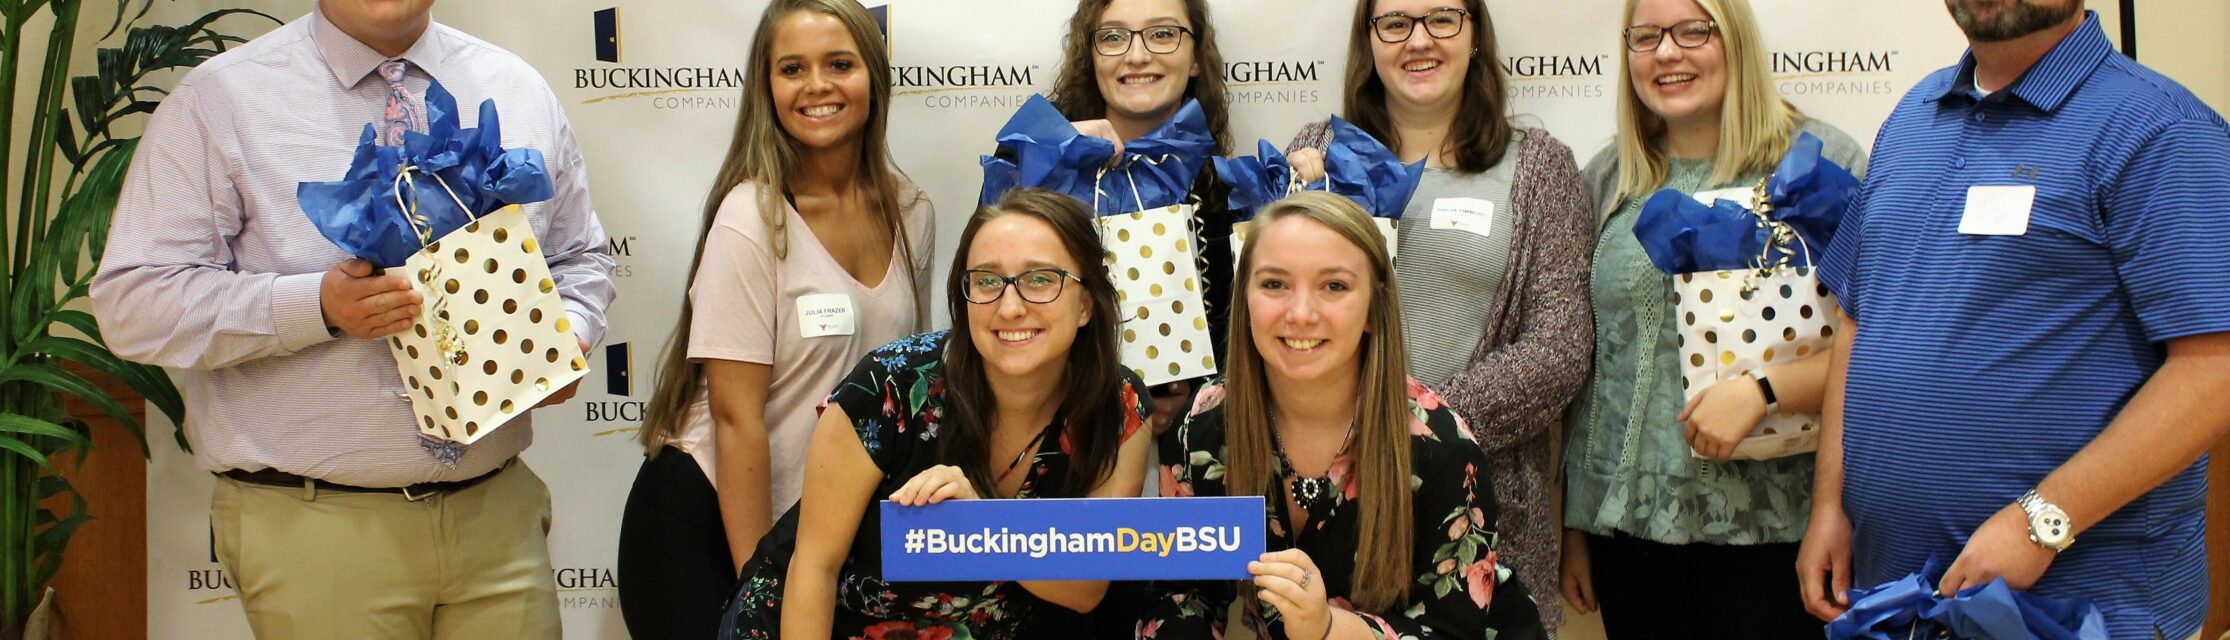 Group photo of Ball State University students holding presents at Buckingham Ball State Career Day